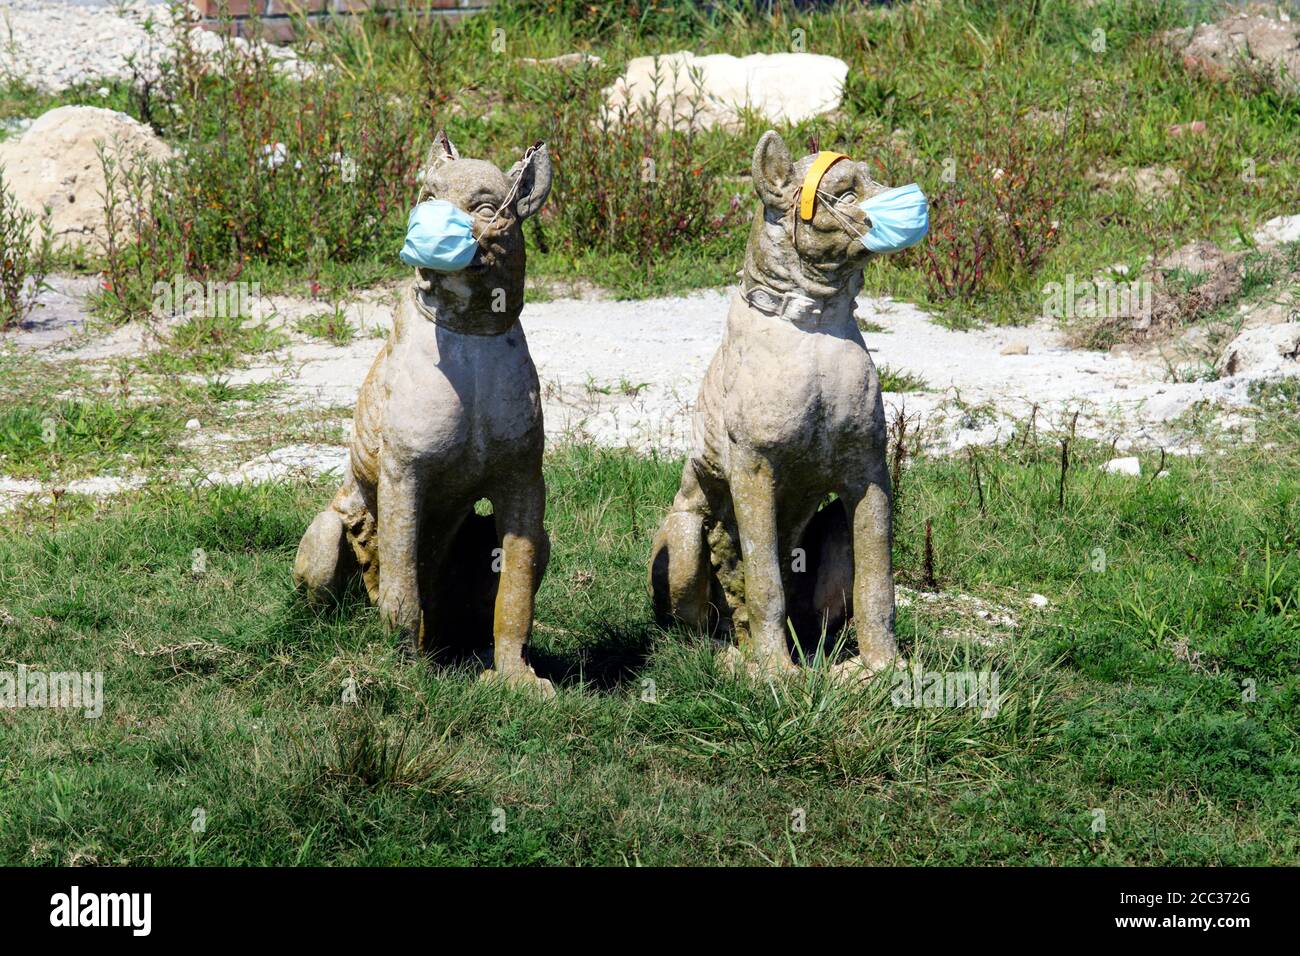 Two stone dogs used as lawn decorations are humorously dressed with face masks during the Corona Virus pandemic. Cape May, New Jersey, USA Stock Photo